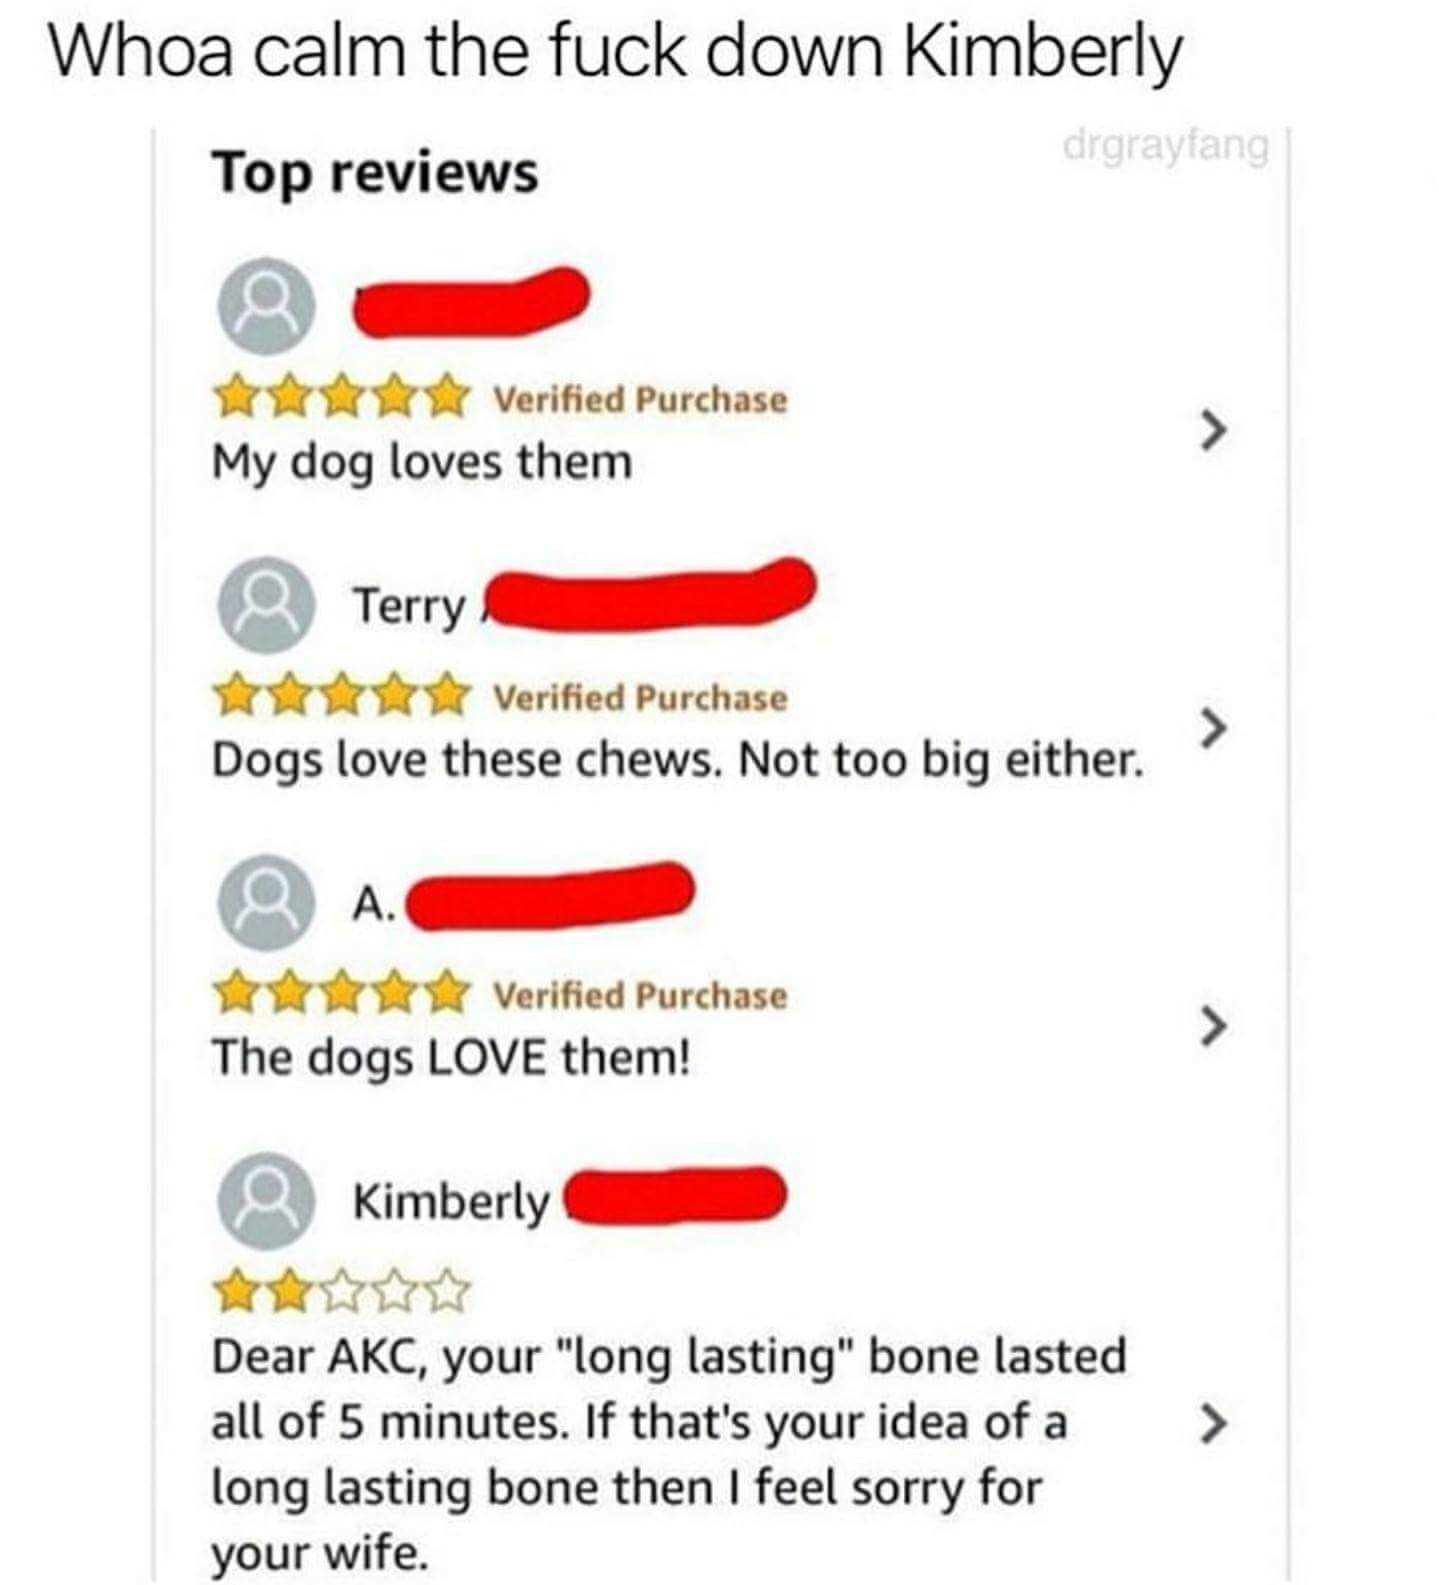 Meme - Whoa calm the fuck down Kimberly Top reviews drgrayfang Verified Purchase My dog loves them a Terry Verified Purchase Dogs love these chews. Not too big either. a Verified Purchase The dogs Love them! Kimberly Dear Akc, your "long lasting" bone las